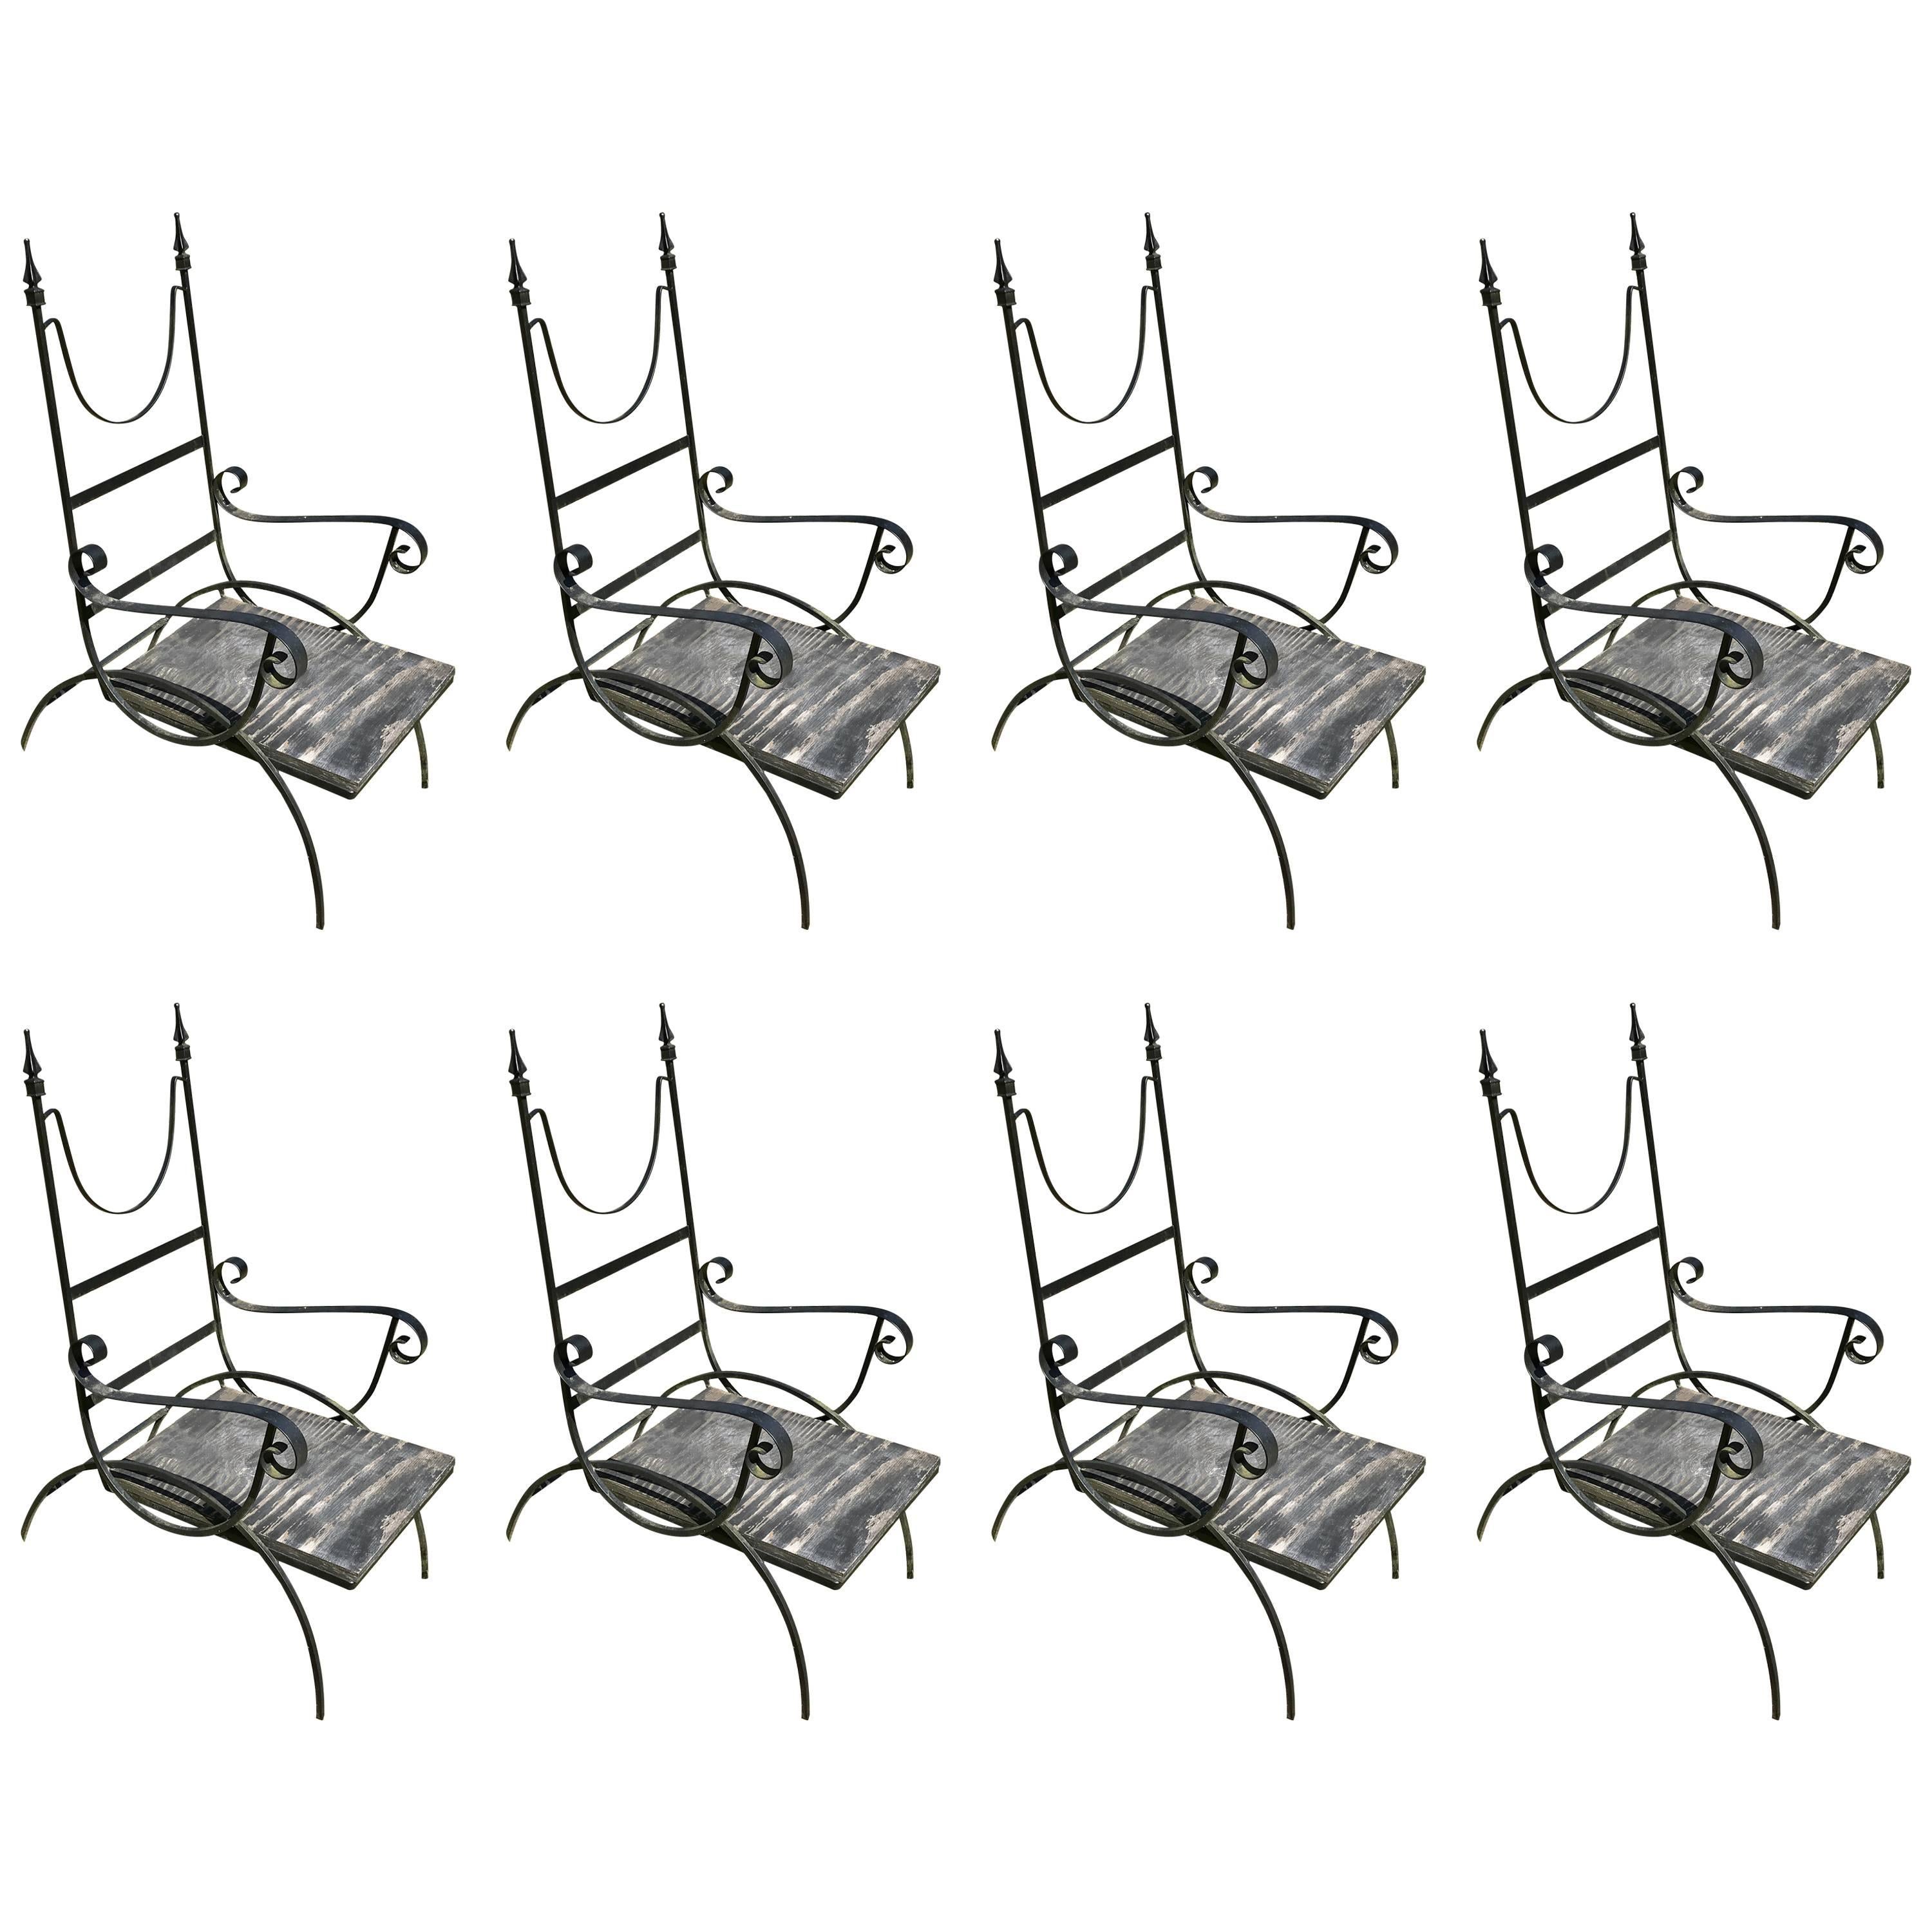 Amazing set of eight wrought iron high back outdoor patio chairs.  Made in Italy for Catskill NY mountain resort circa 1960's.  Great lines and design, very sturdy and heavy, no breaks, no rust. Need to be powder coated or painted. Seats are marine